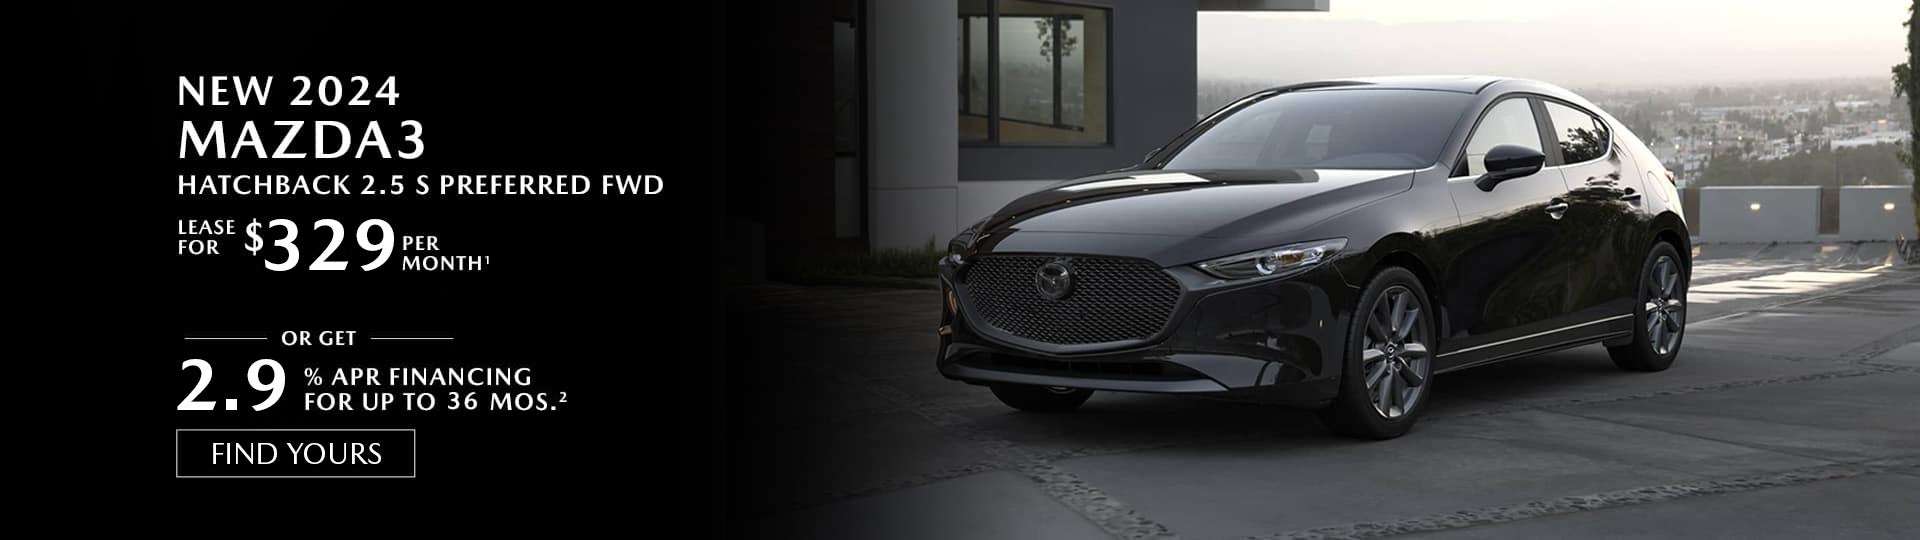 2024 Mazda3 special offers